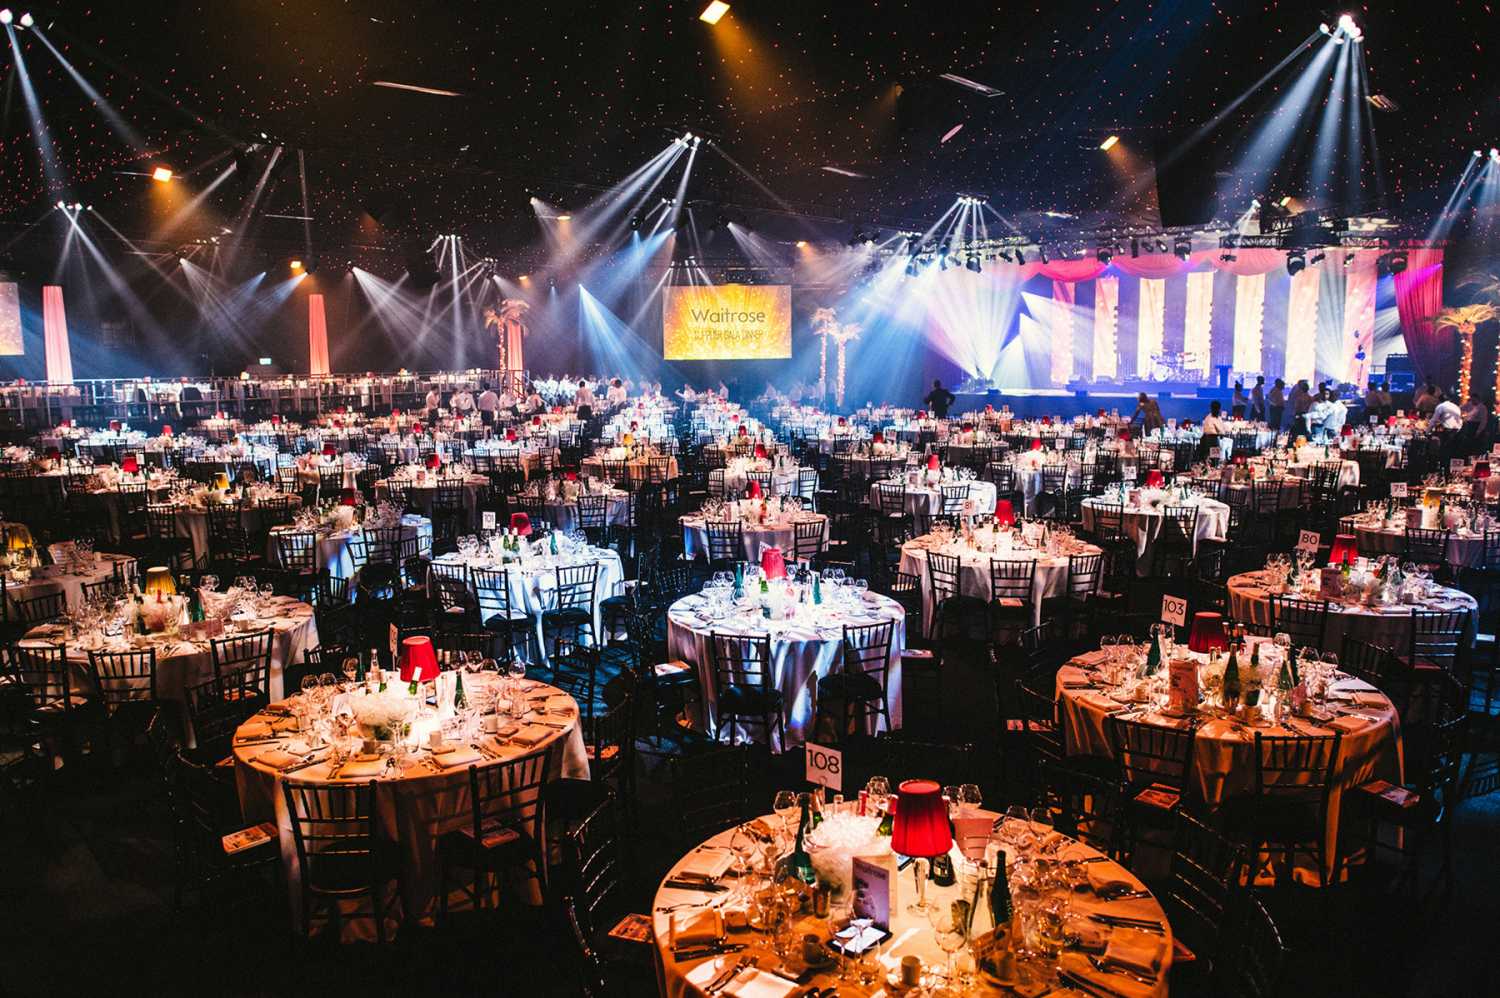 Hawthorn worked with Entertee Events to transform the venue into a show-stopping party venue